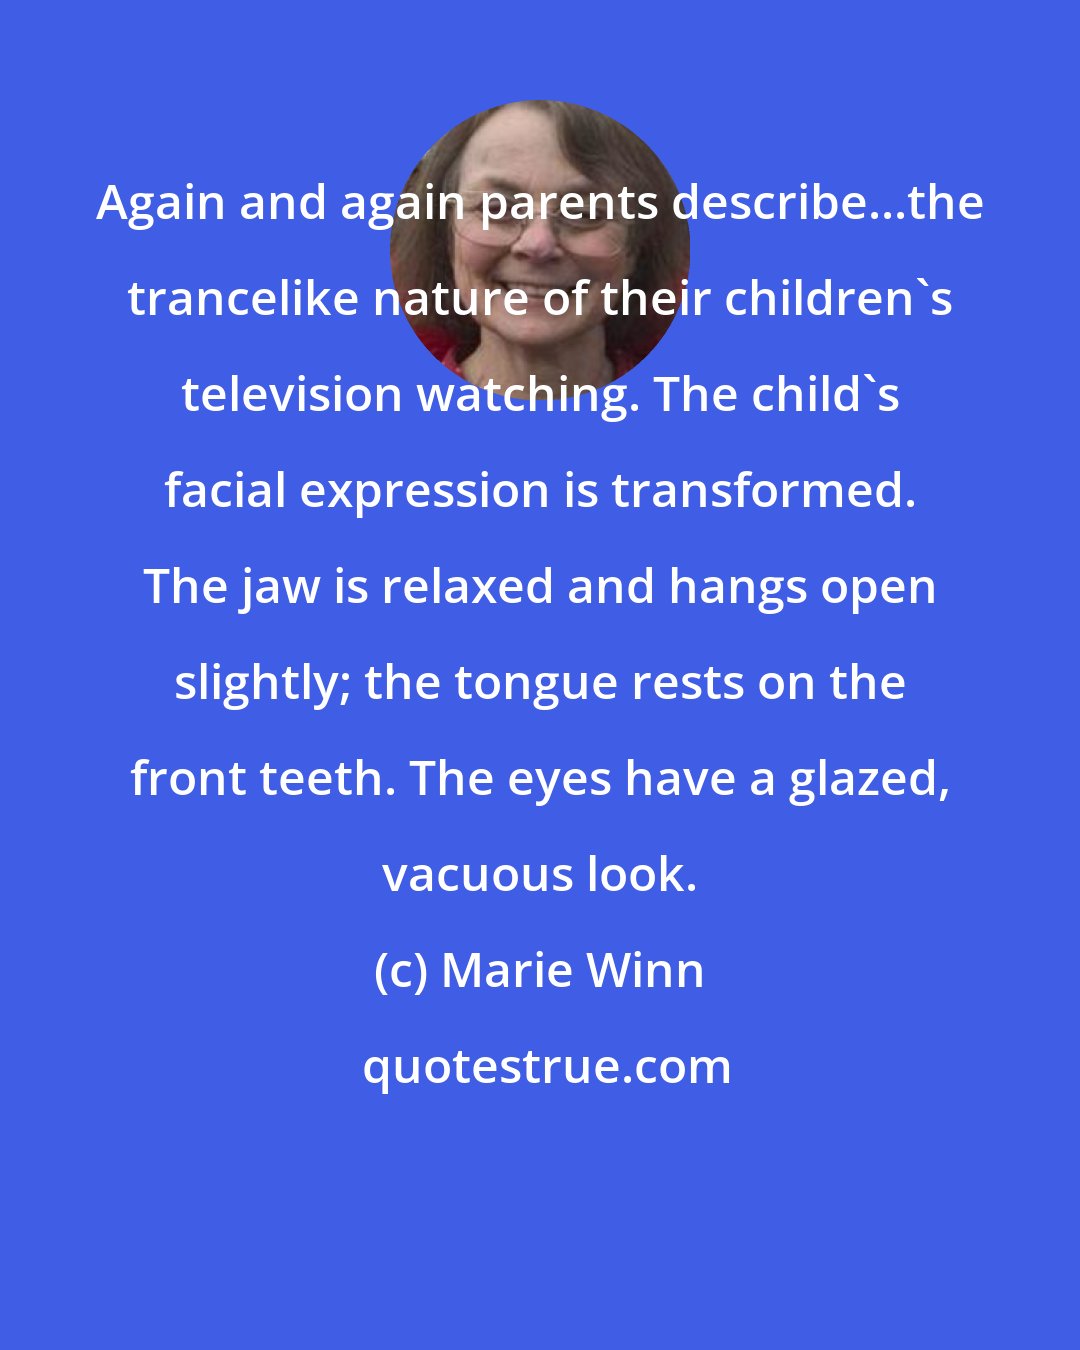 Marie Winn: Again and again parents describe...the trancelike nature of their children's television watching. The child's facial expression is transformed. The jaw is relaxed and hangs open slightly; the tongue rests on the front teeth. The eyes have a glazed, vacuous look.